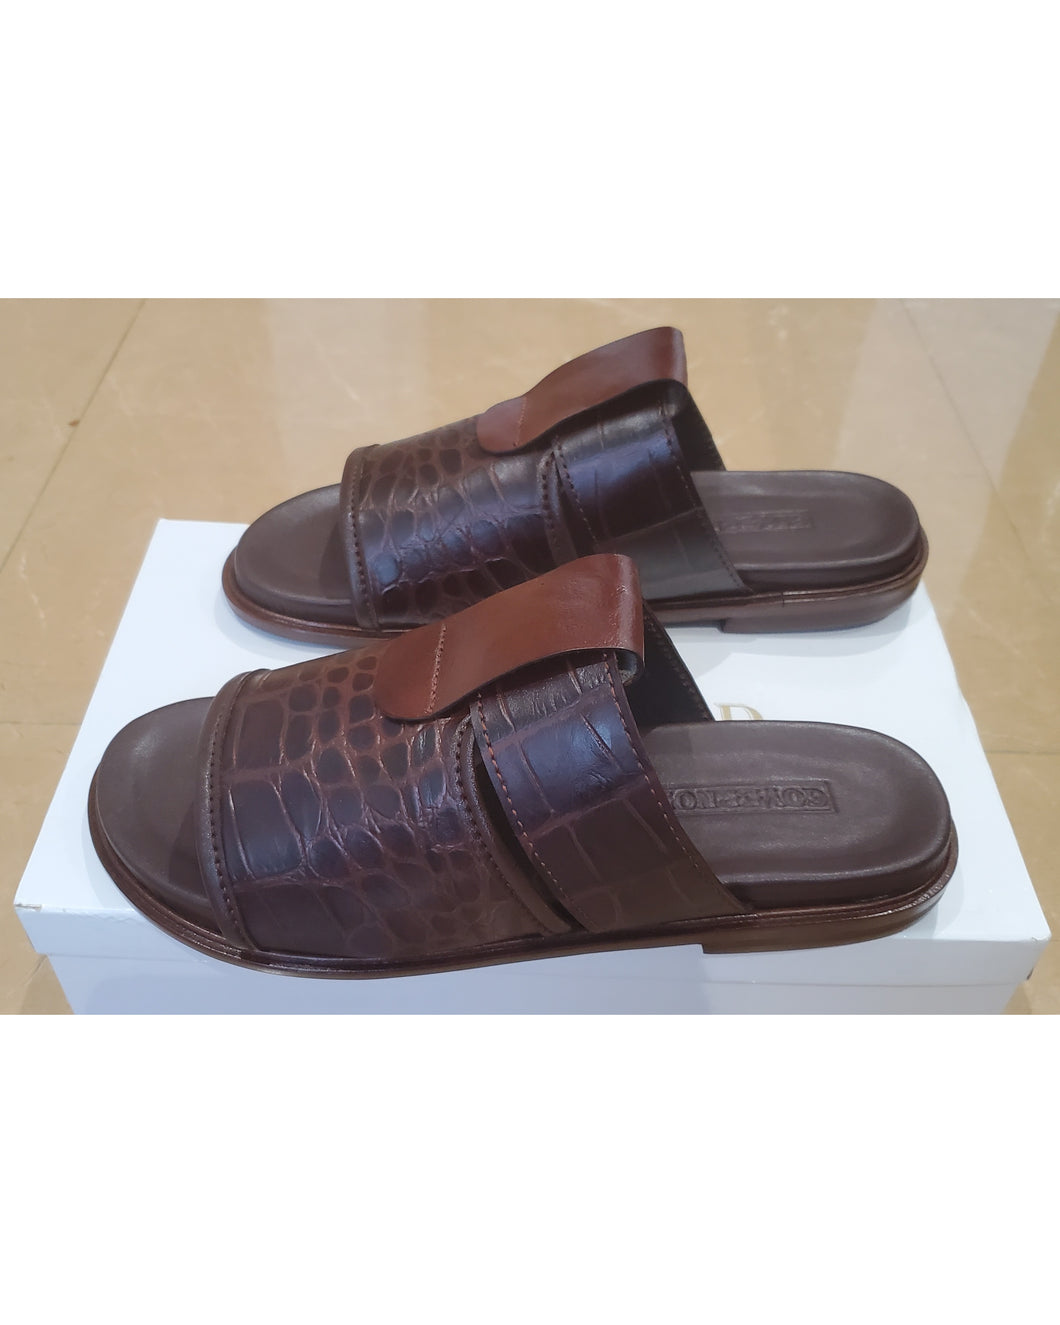 BROWN GOVERNORS ALLIGATOR T-DESIGN SOFT INSOLE SLIPPERS